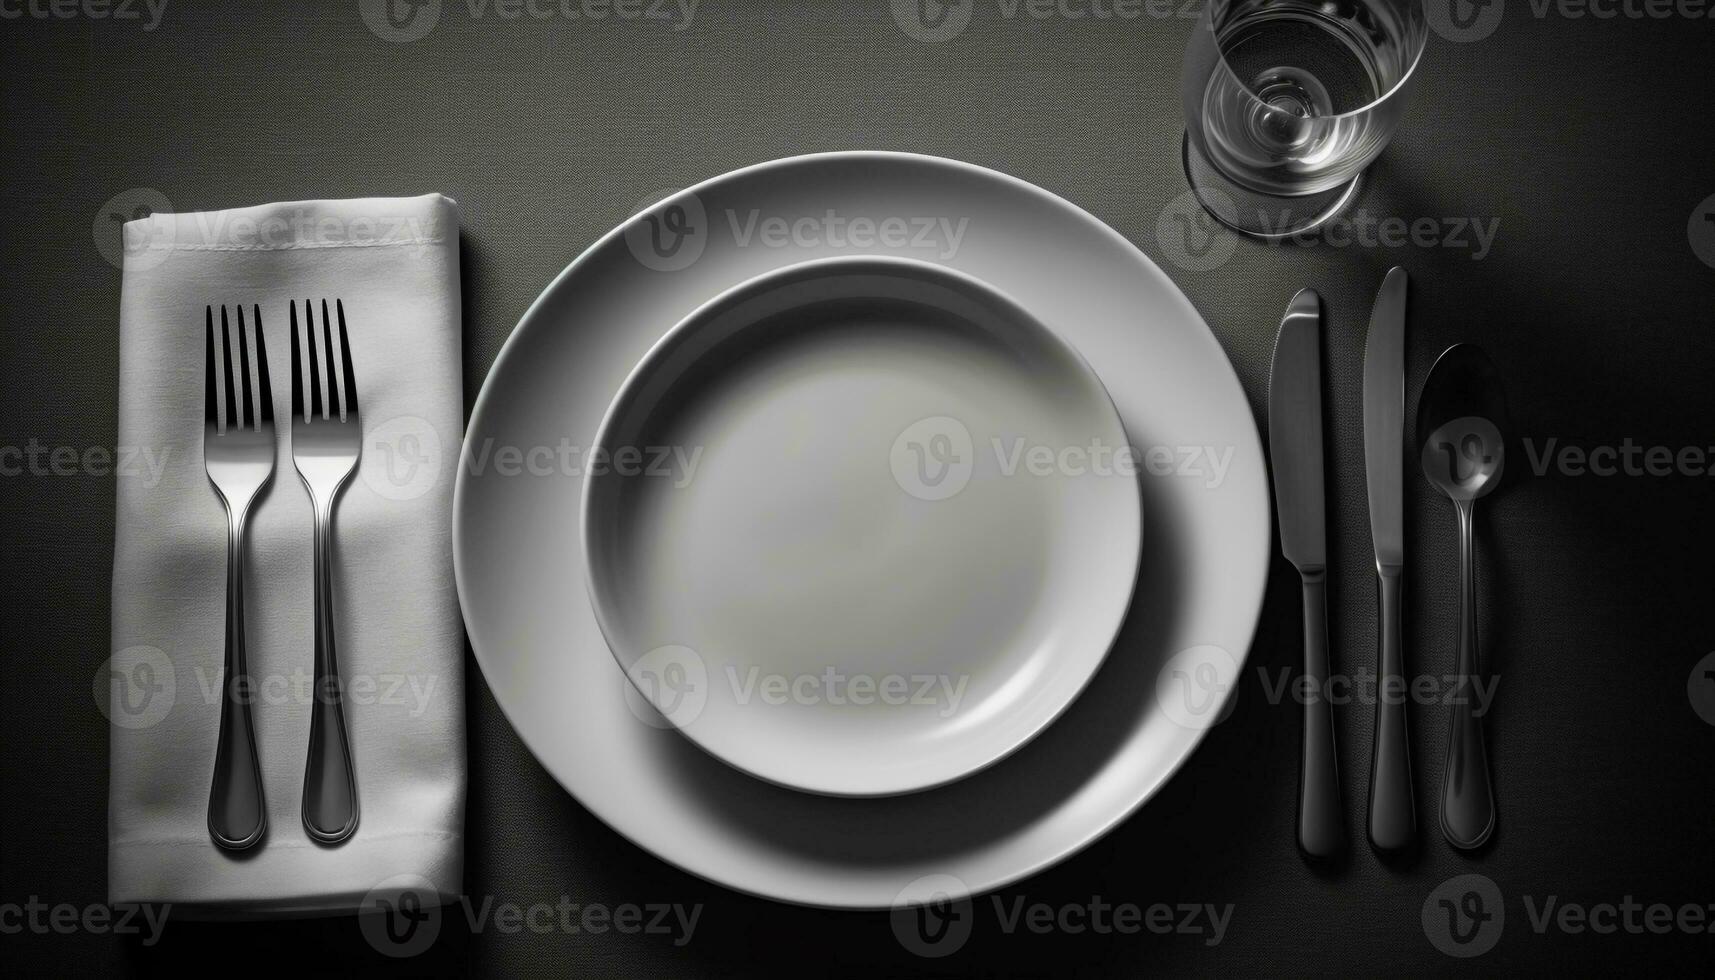 Clean elegance shines in monochrome still life of silver service generated by AI photo